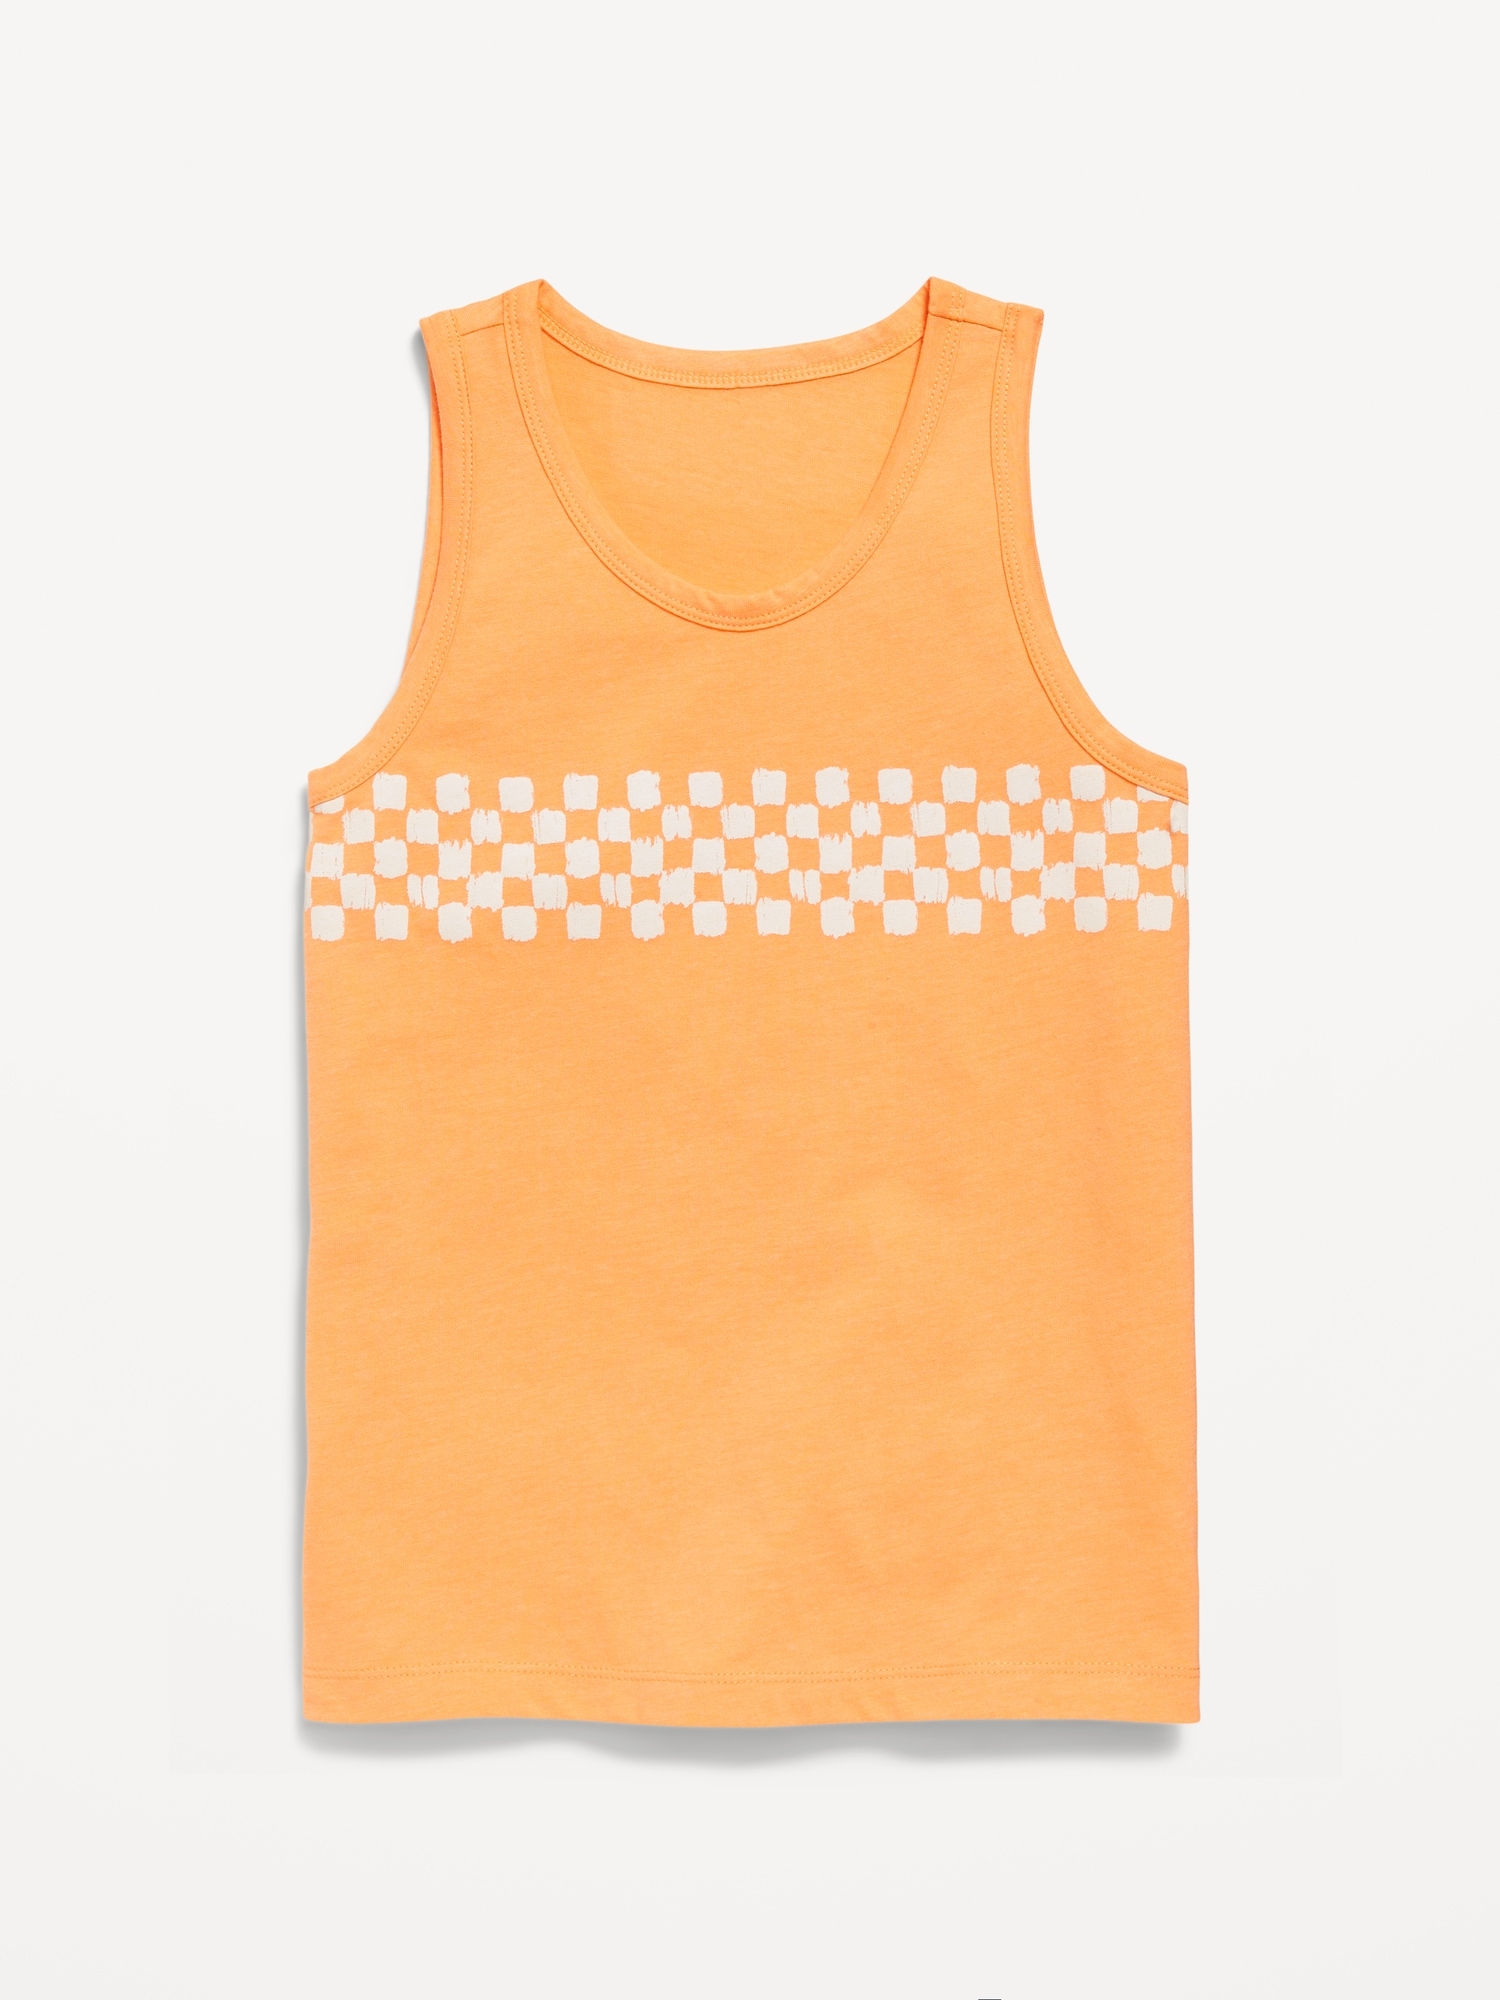 Printed Softest Tank Top for Boys